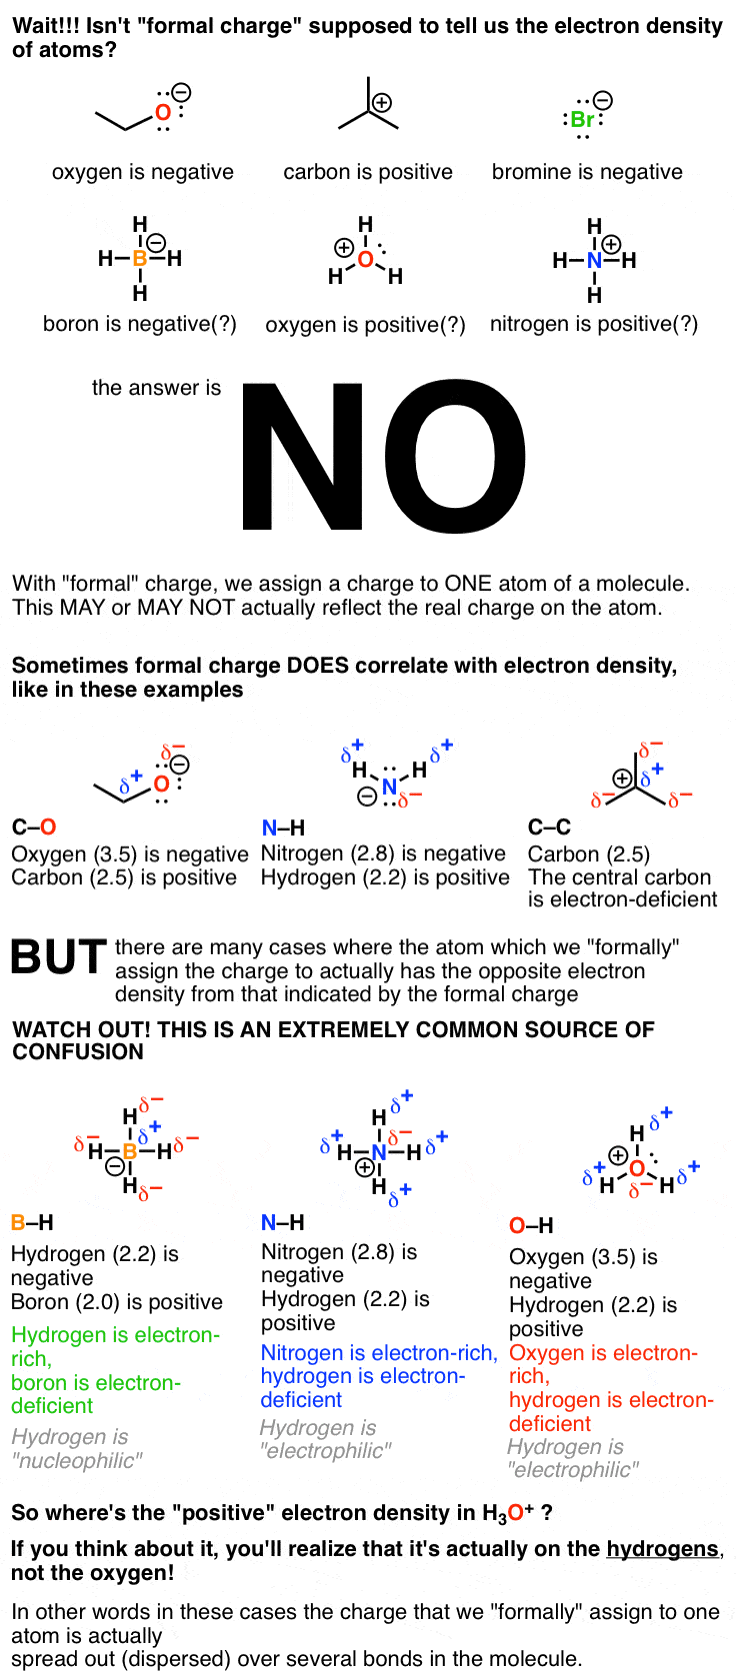 partial-charge-is-not-a-reliable-guide-to-electron-density-of-atoms-example-bh4-nh4-h3o